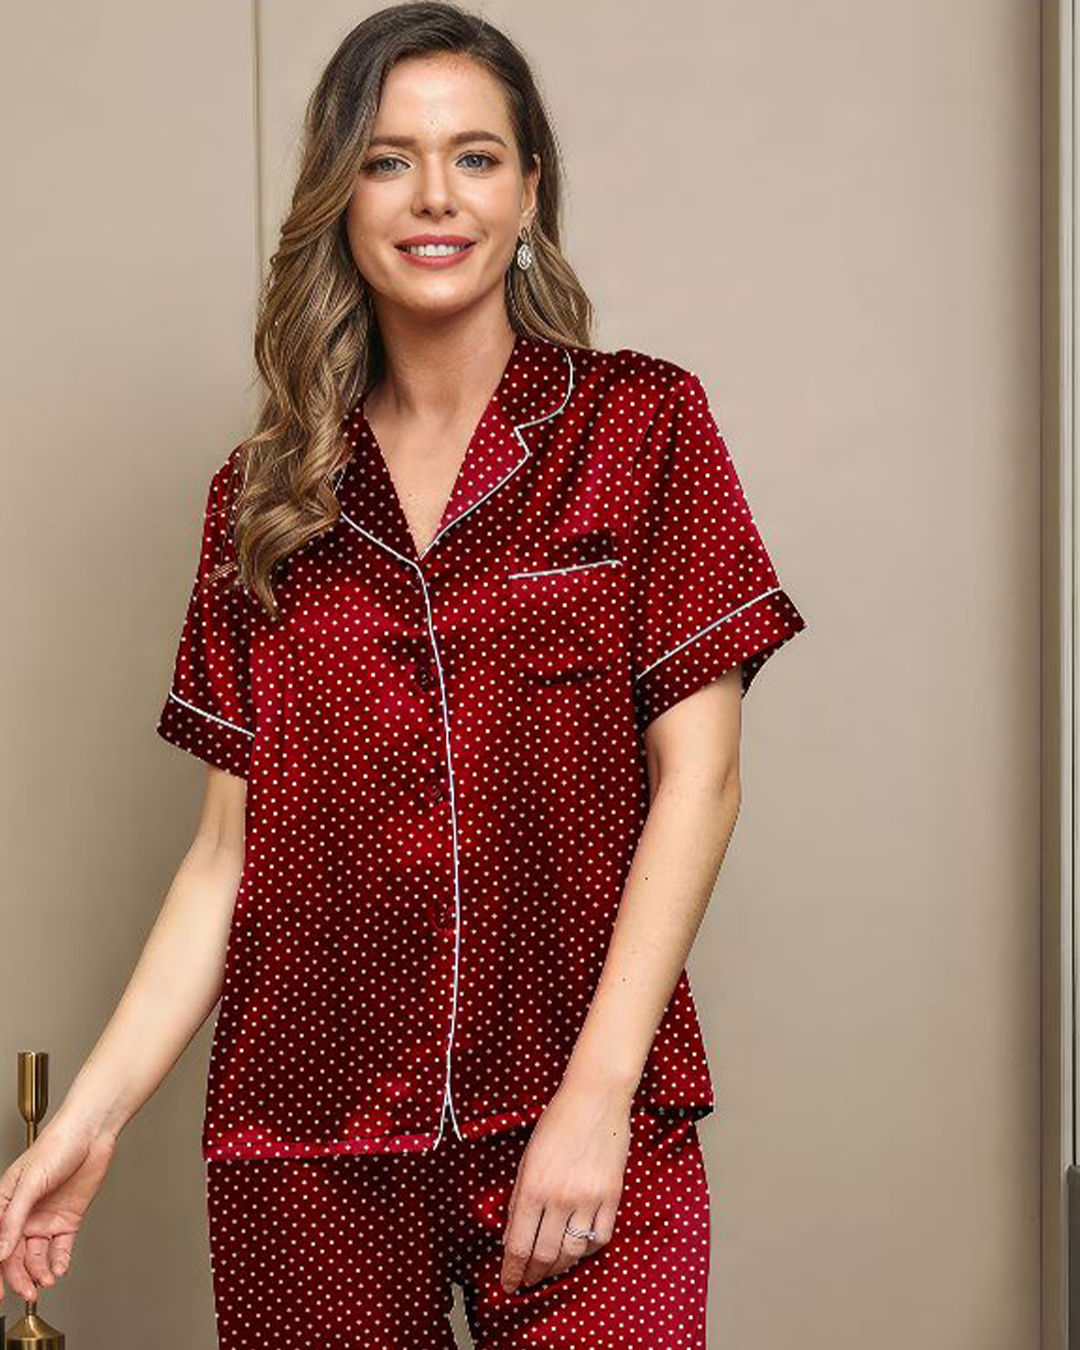 Women's pajamas, satin, dotted, buttons, half sleeves